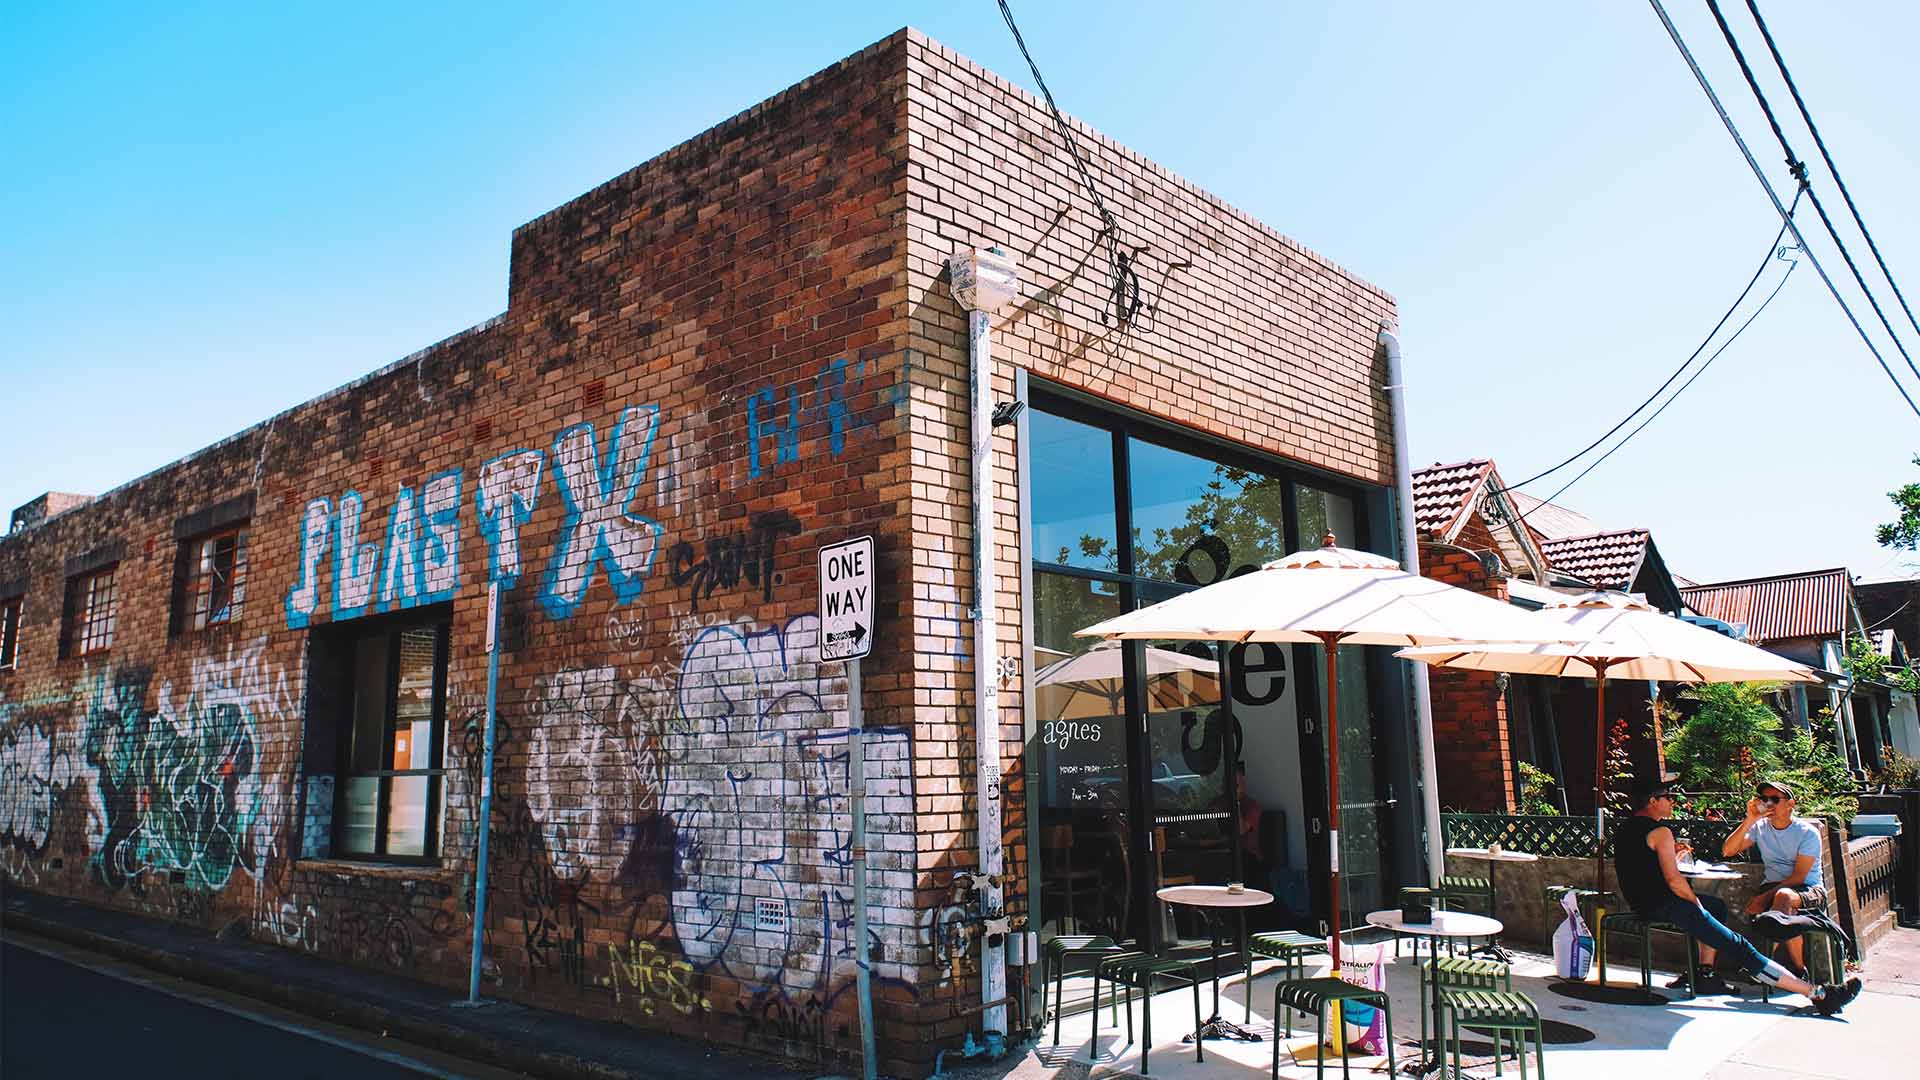 A red brick cafe covered in graffiti in Marrickville